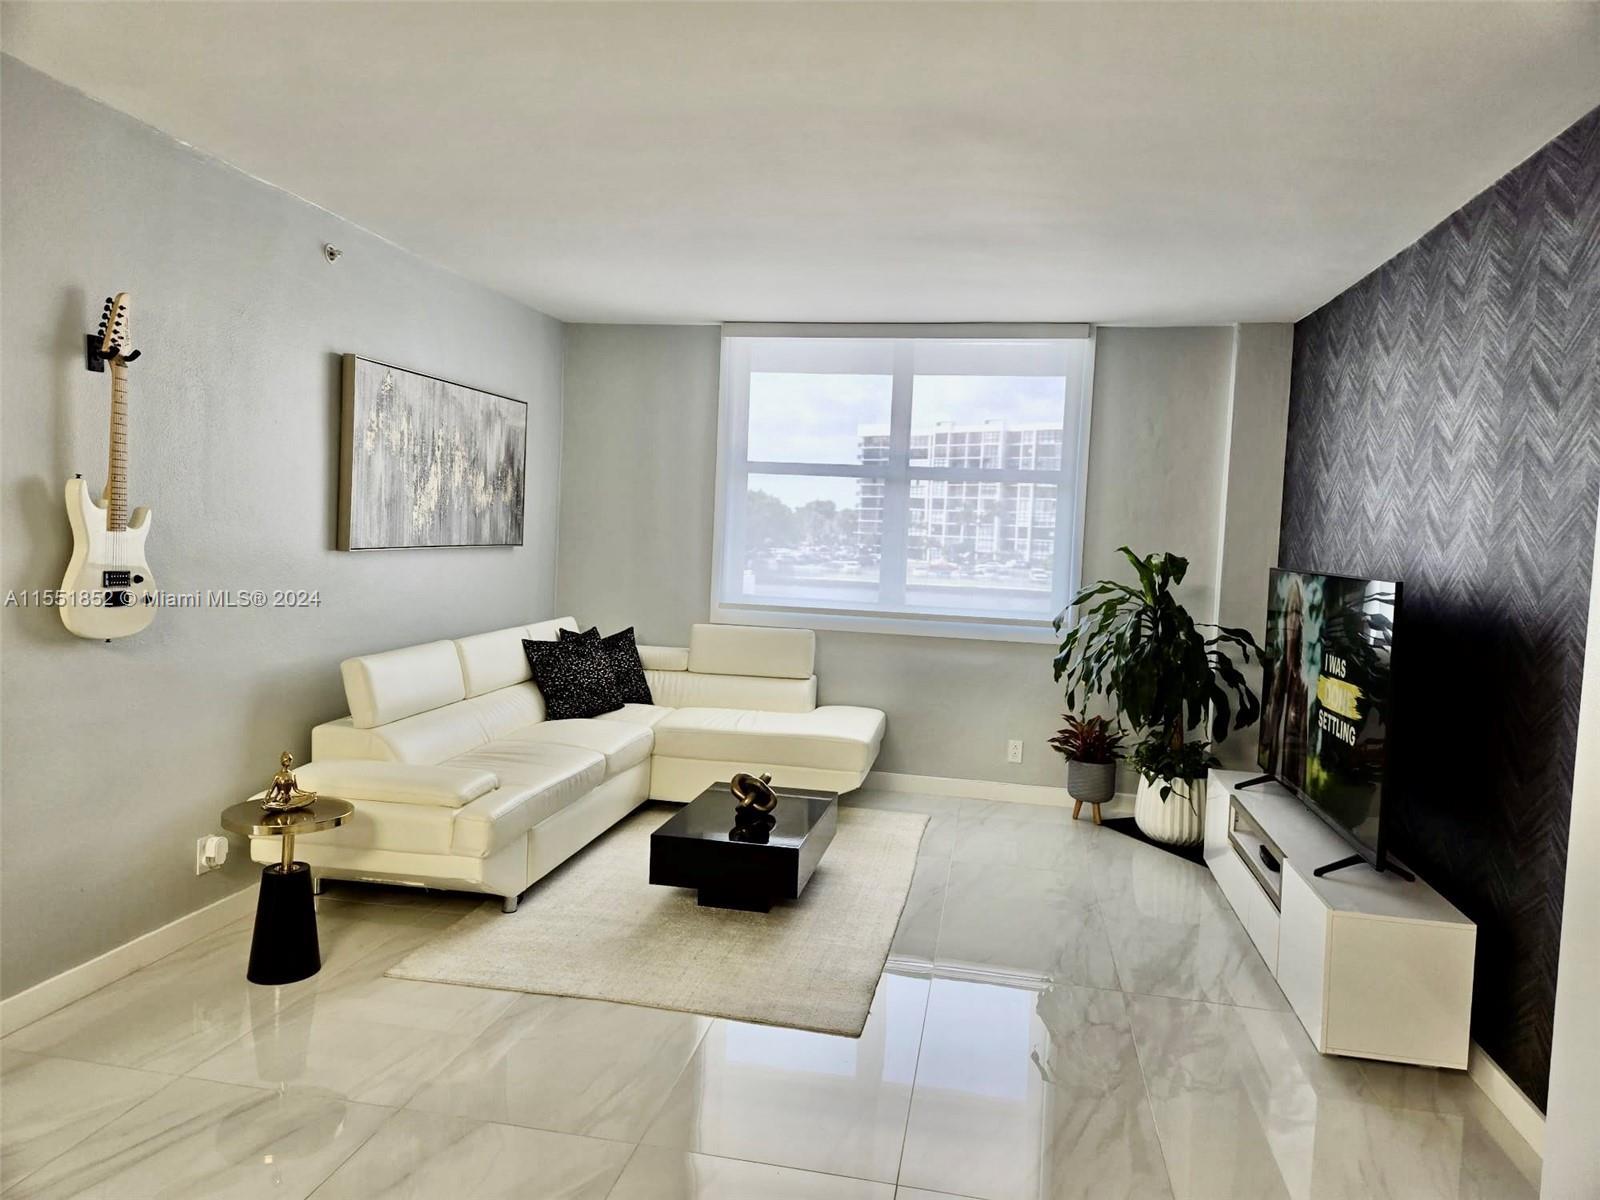 Dive into coastal living at this stunning condo on 3000 S Ocean Dr.! Completely renovated and move-i